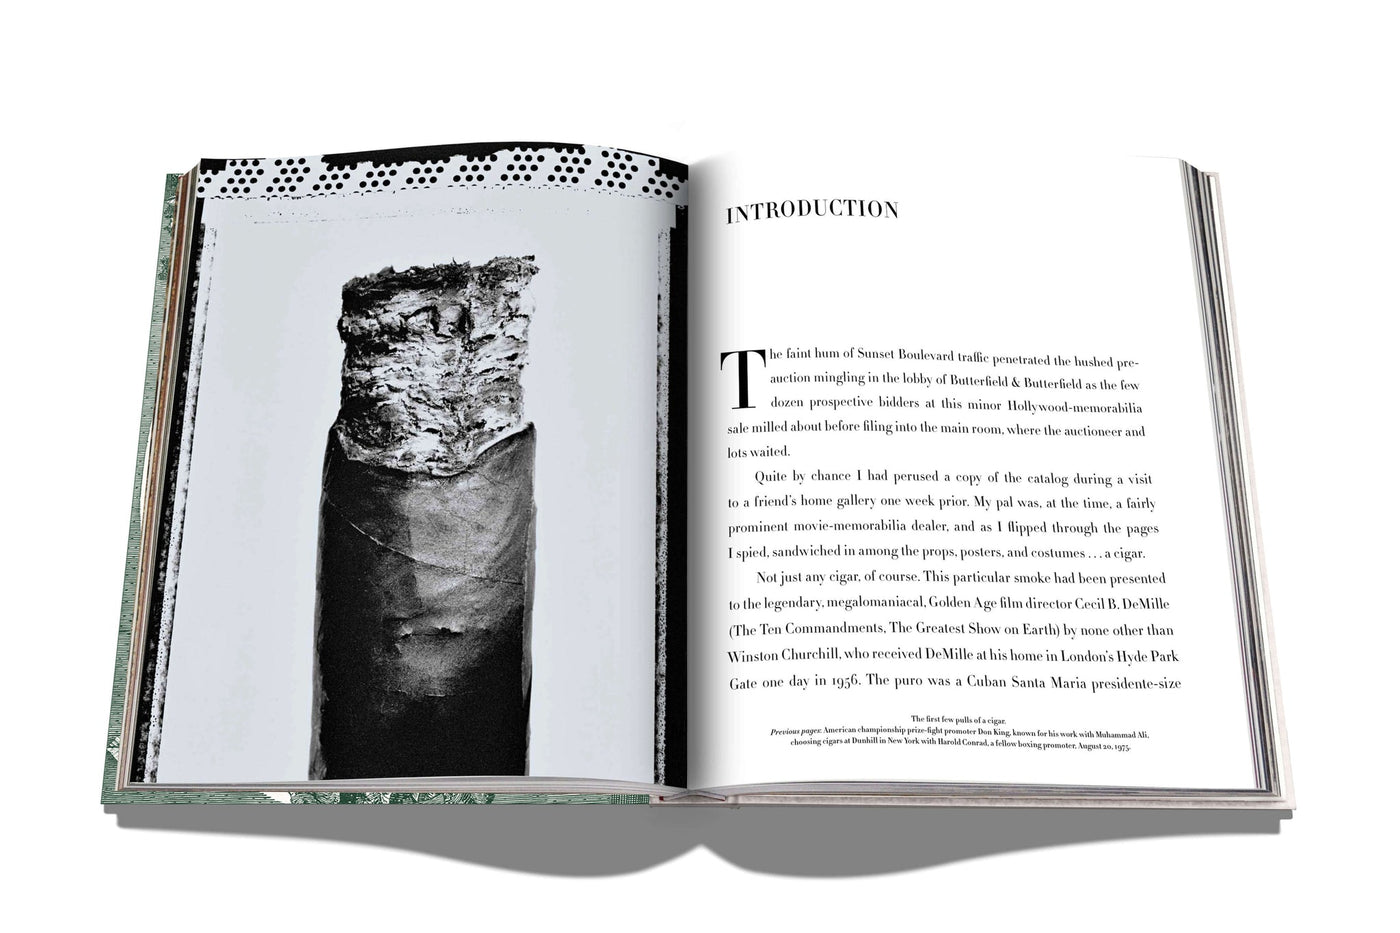 The Impossible Collection of Cigars Book